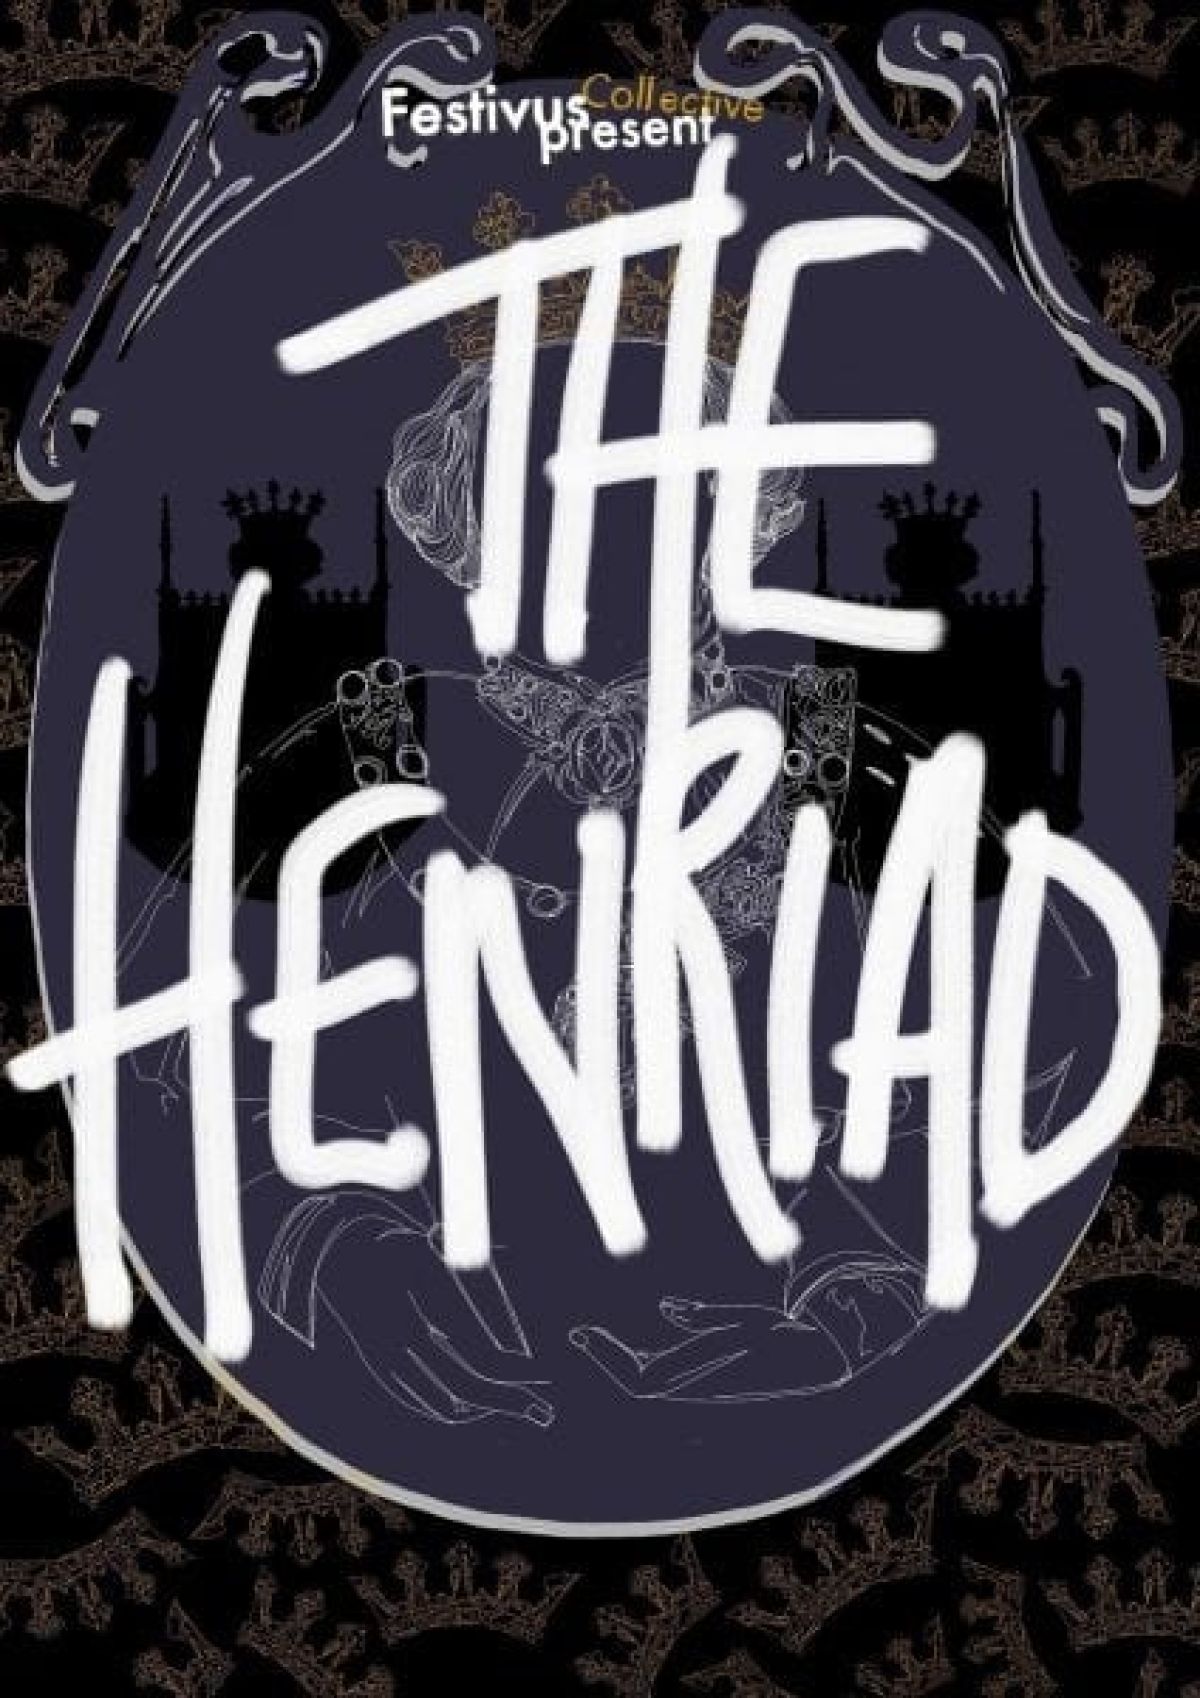 Tales from the Fringe: The Henriad